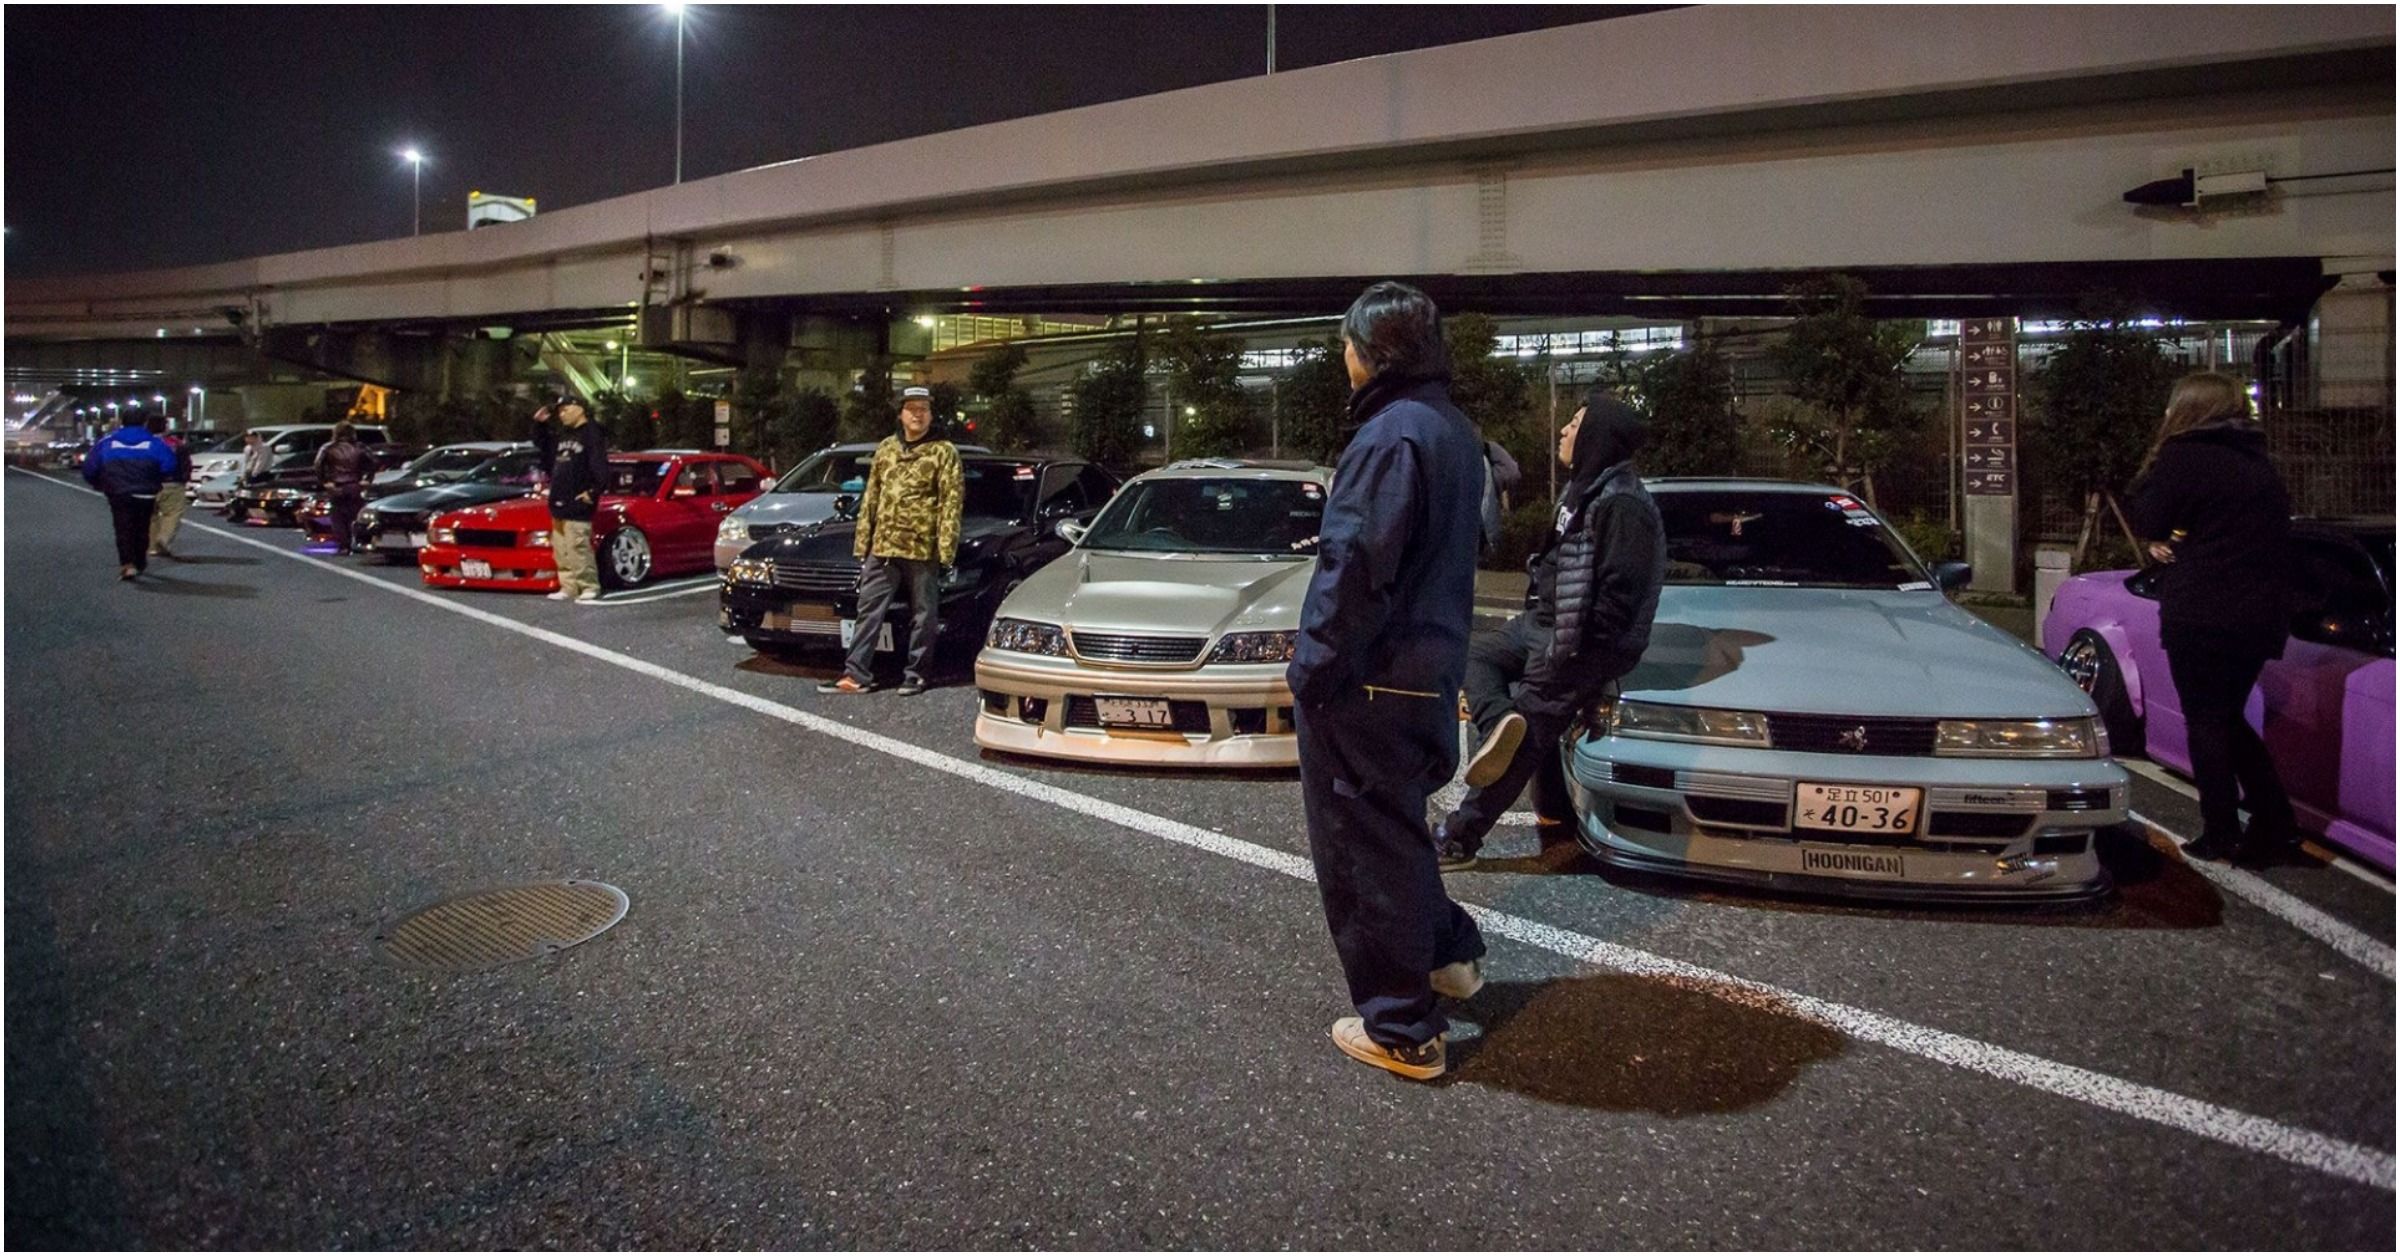 HotCarsMidnight Club – 15 Facts About Japan’s Notorious Underground Street Racing Club